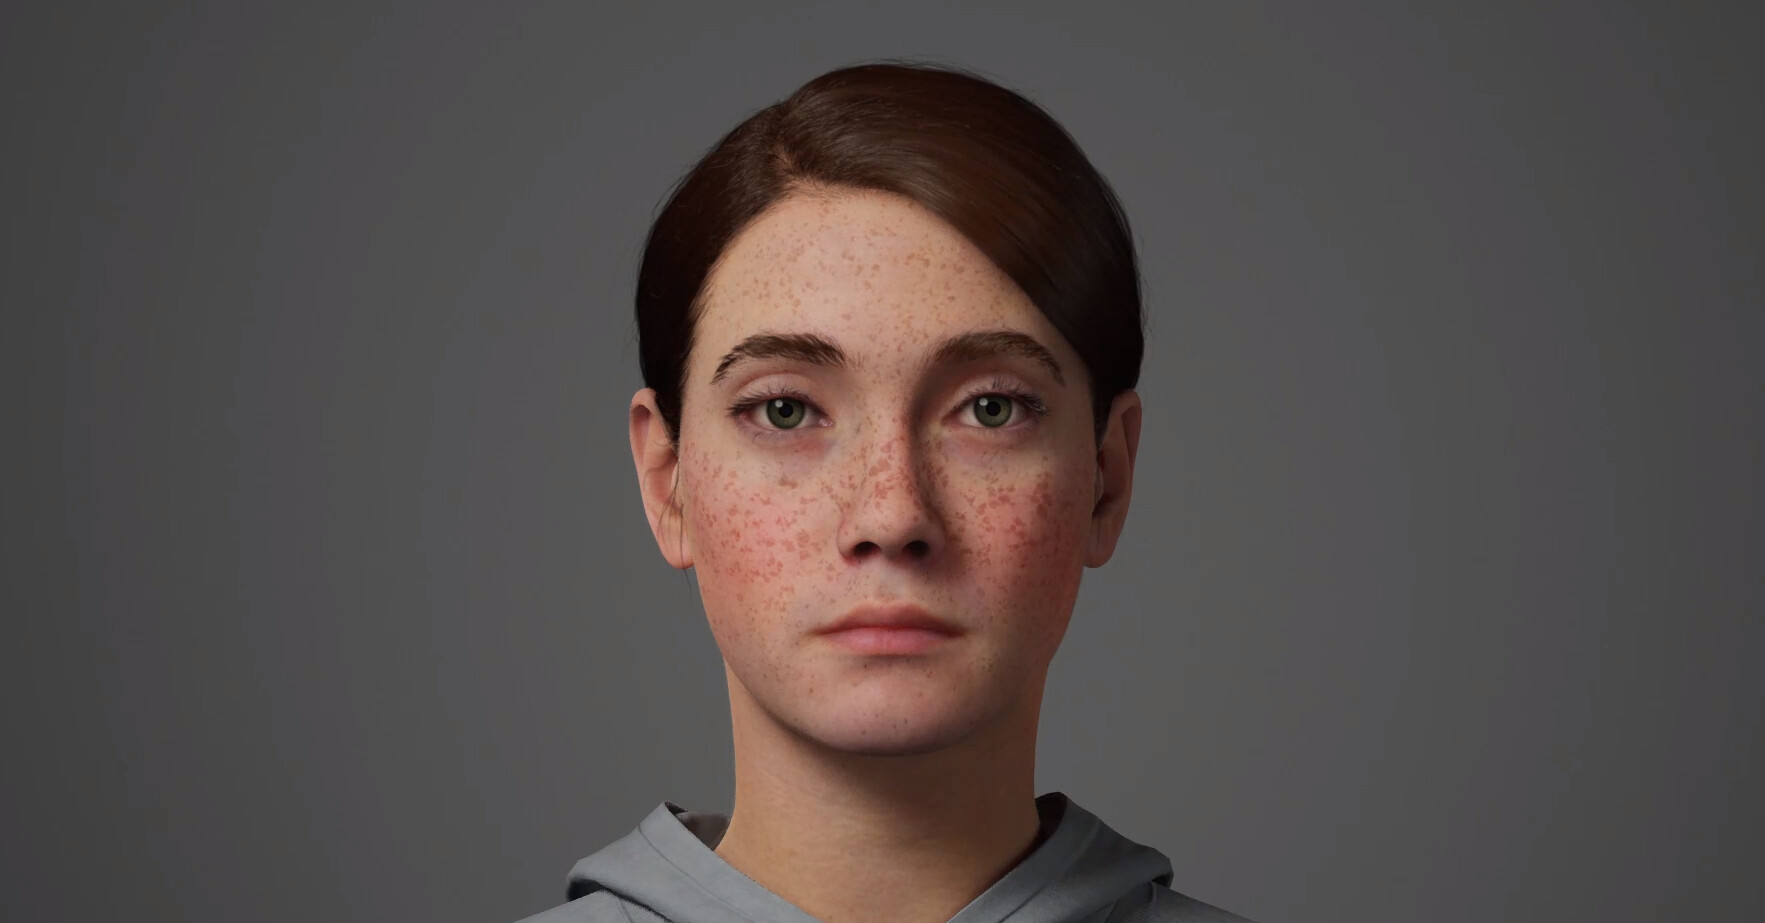 The face of Ellie from The Last of Us was based on a genderbent